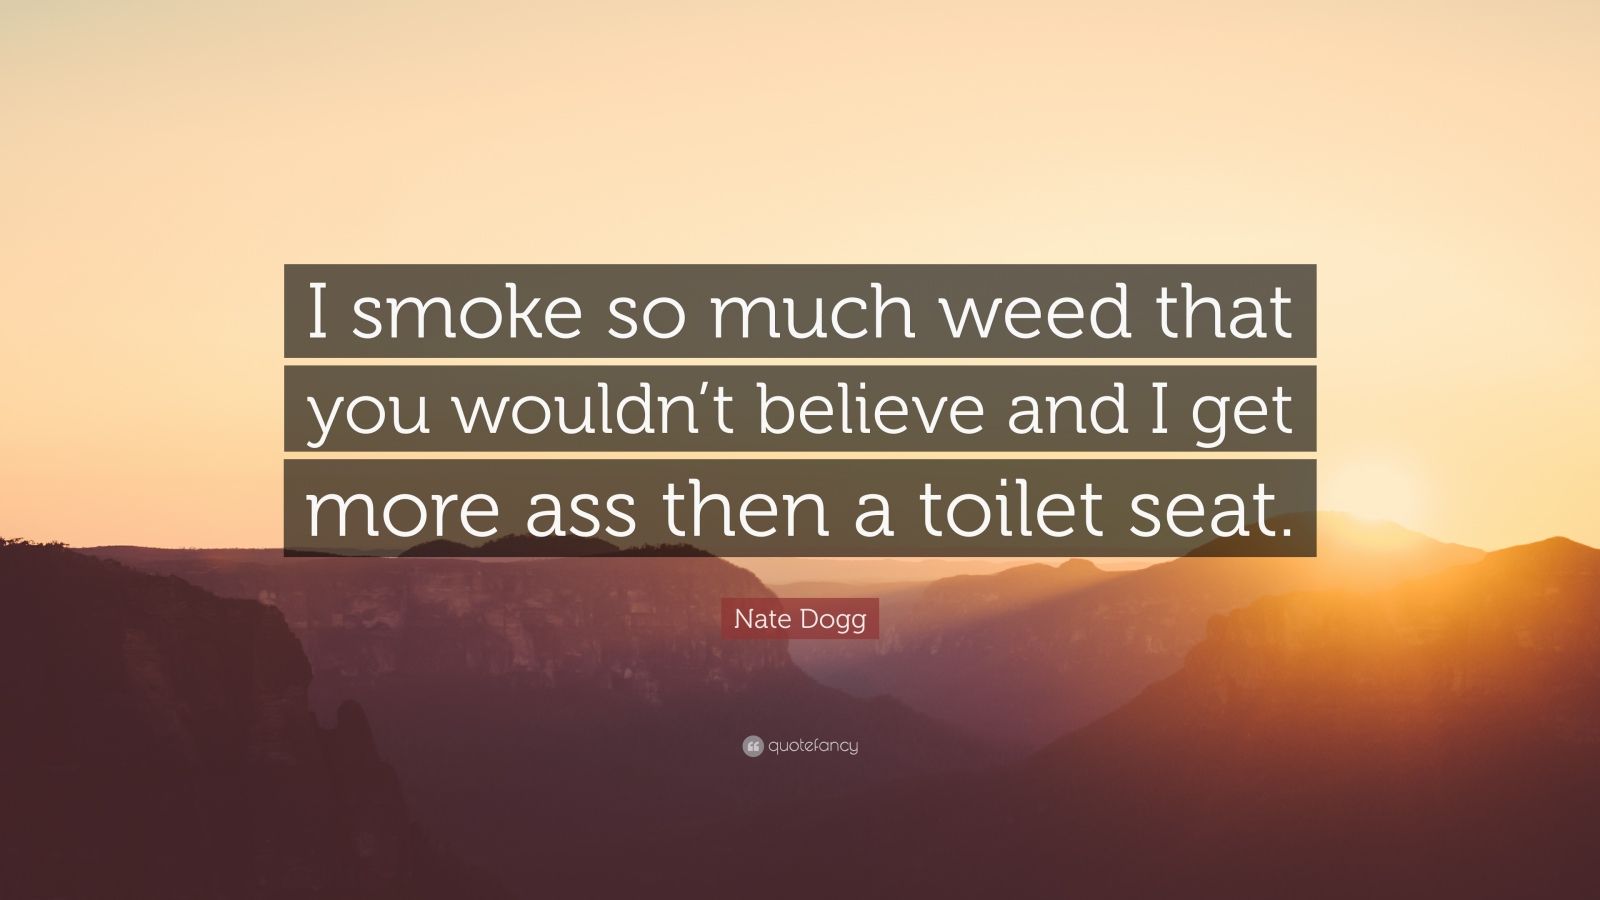 Nate Dogg Quote: "I smoke so much weed that you wouldn't believe and I get more ass then a ...